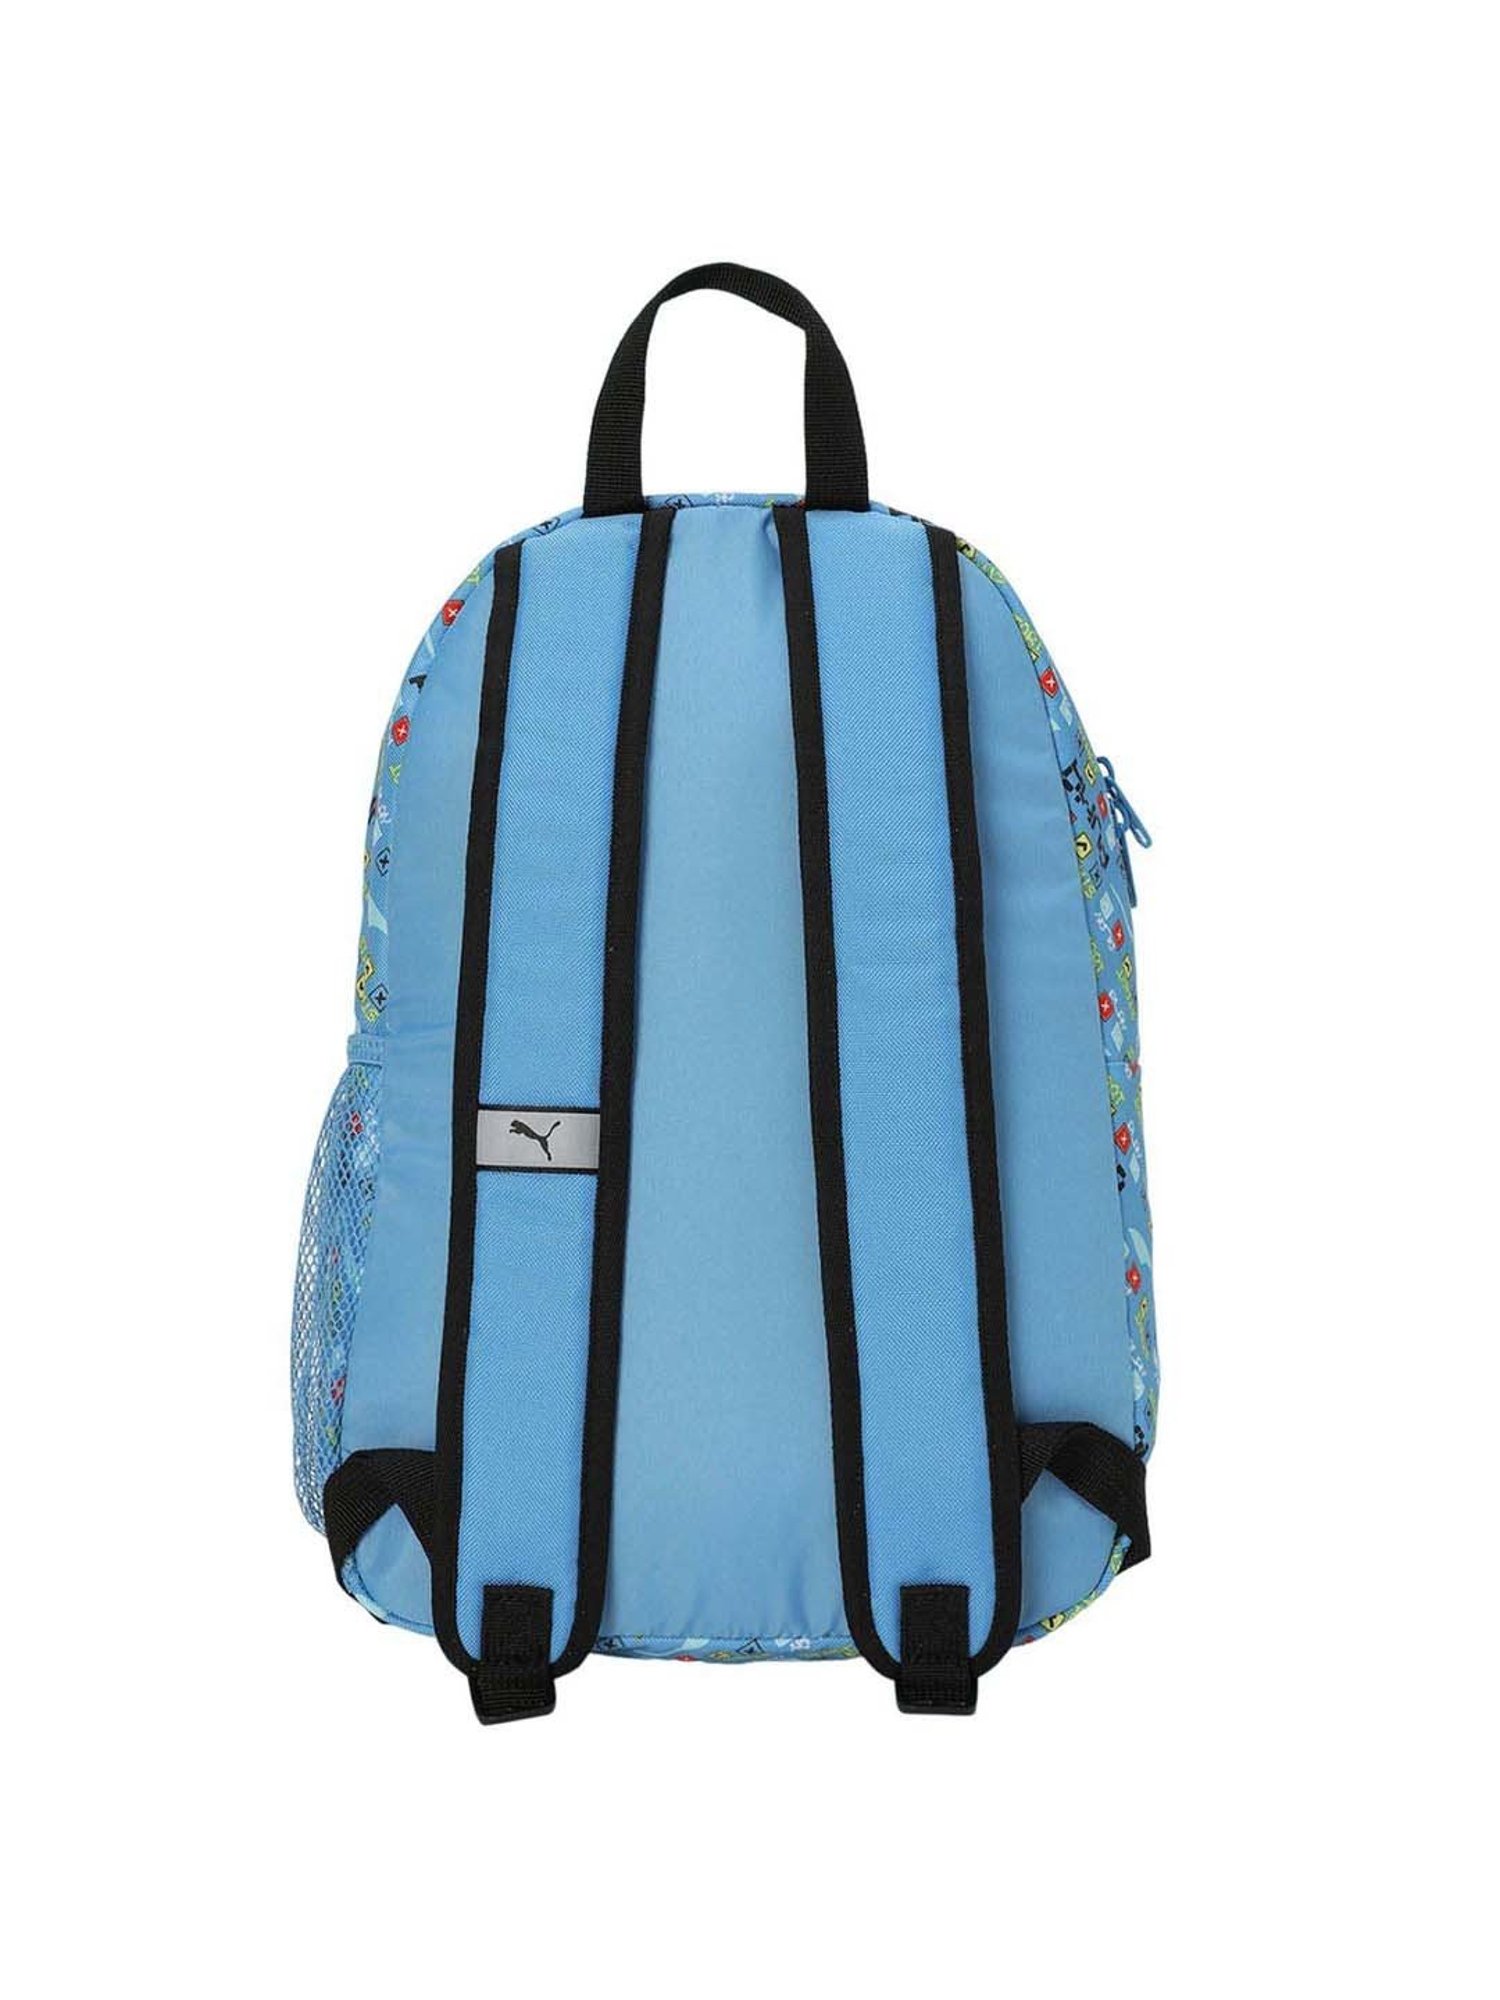 Buy Puma Unisex-Adult TapeColorblock Backpack, Nrgy Blue-Black (9103502) at  Amazon.in